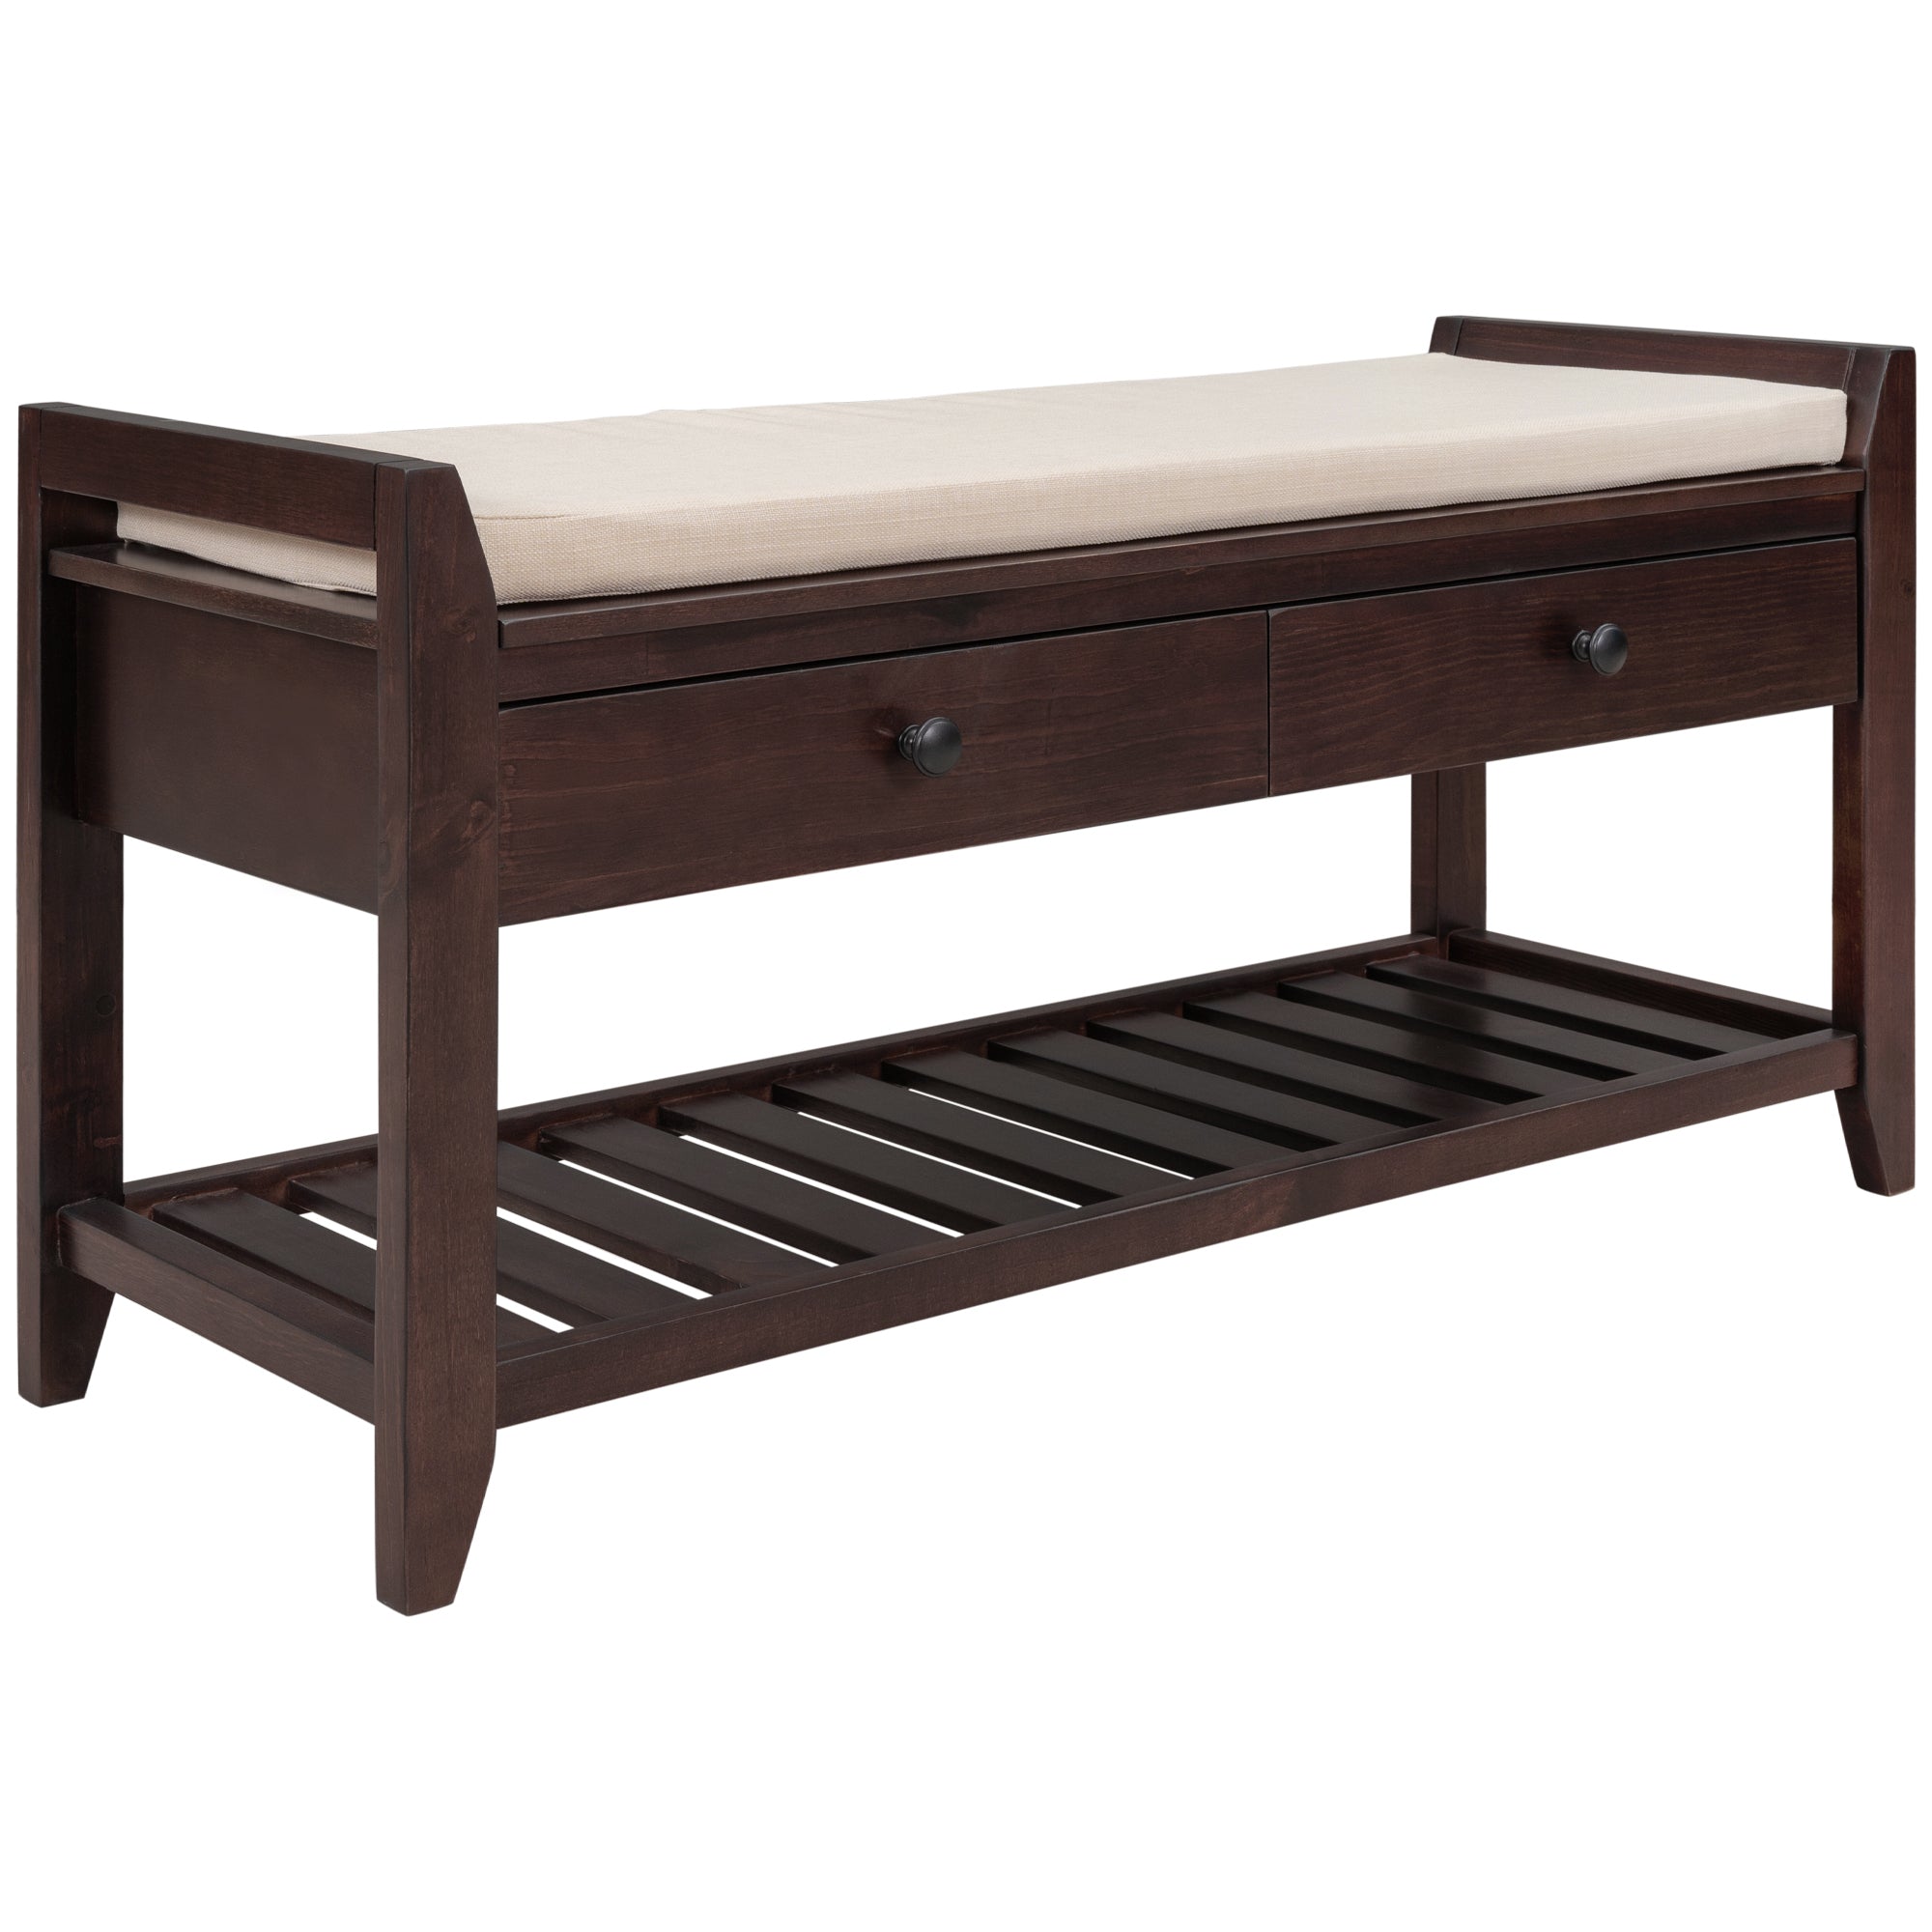 39" Espresso Storage Seating Bench With Drawers and Undershelf